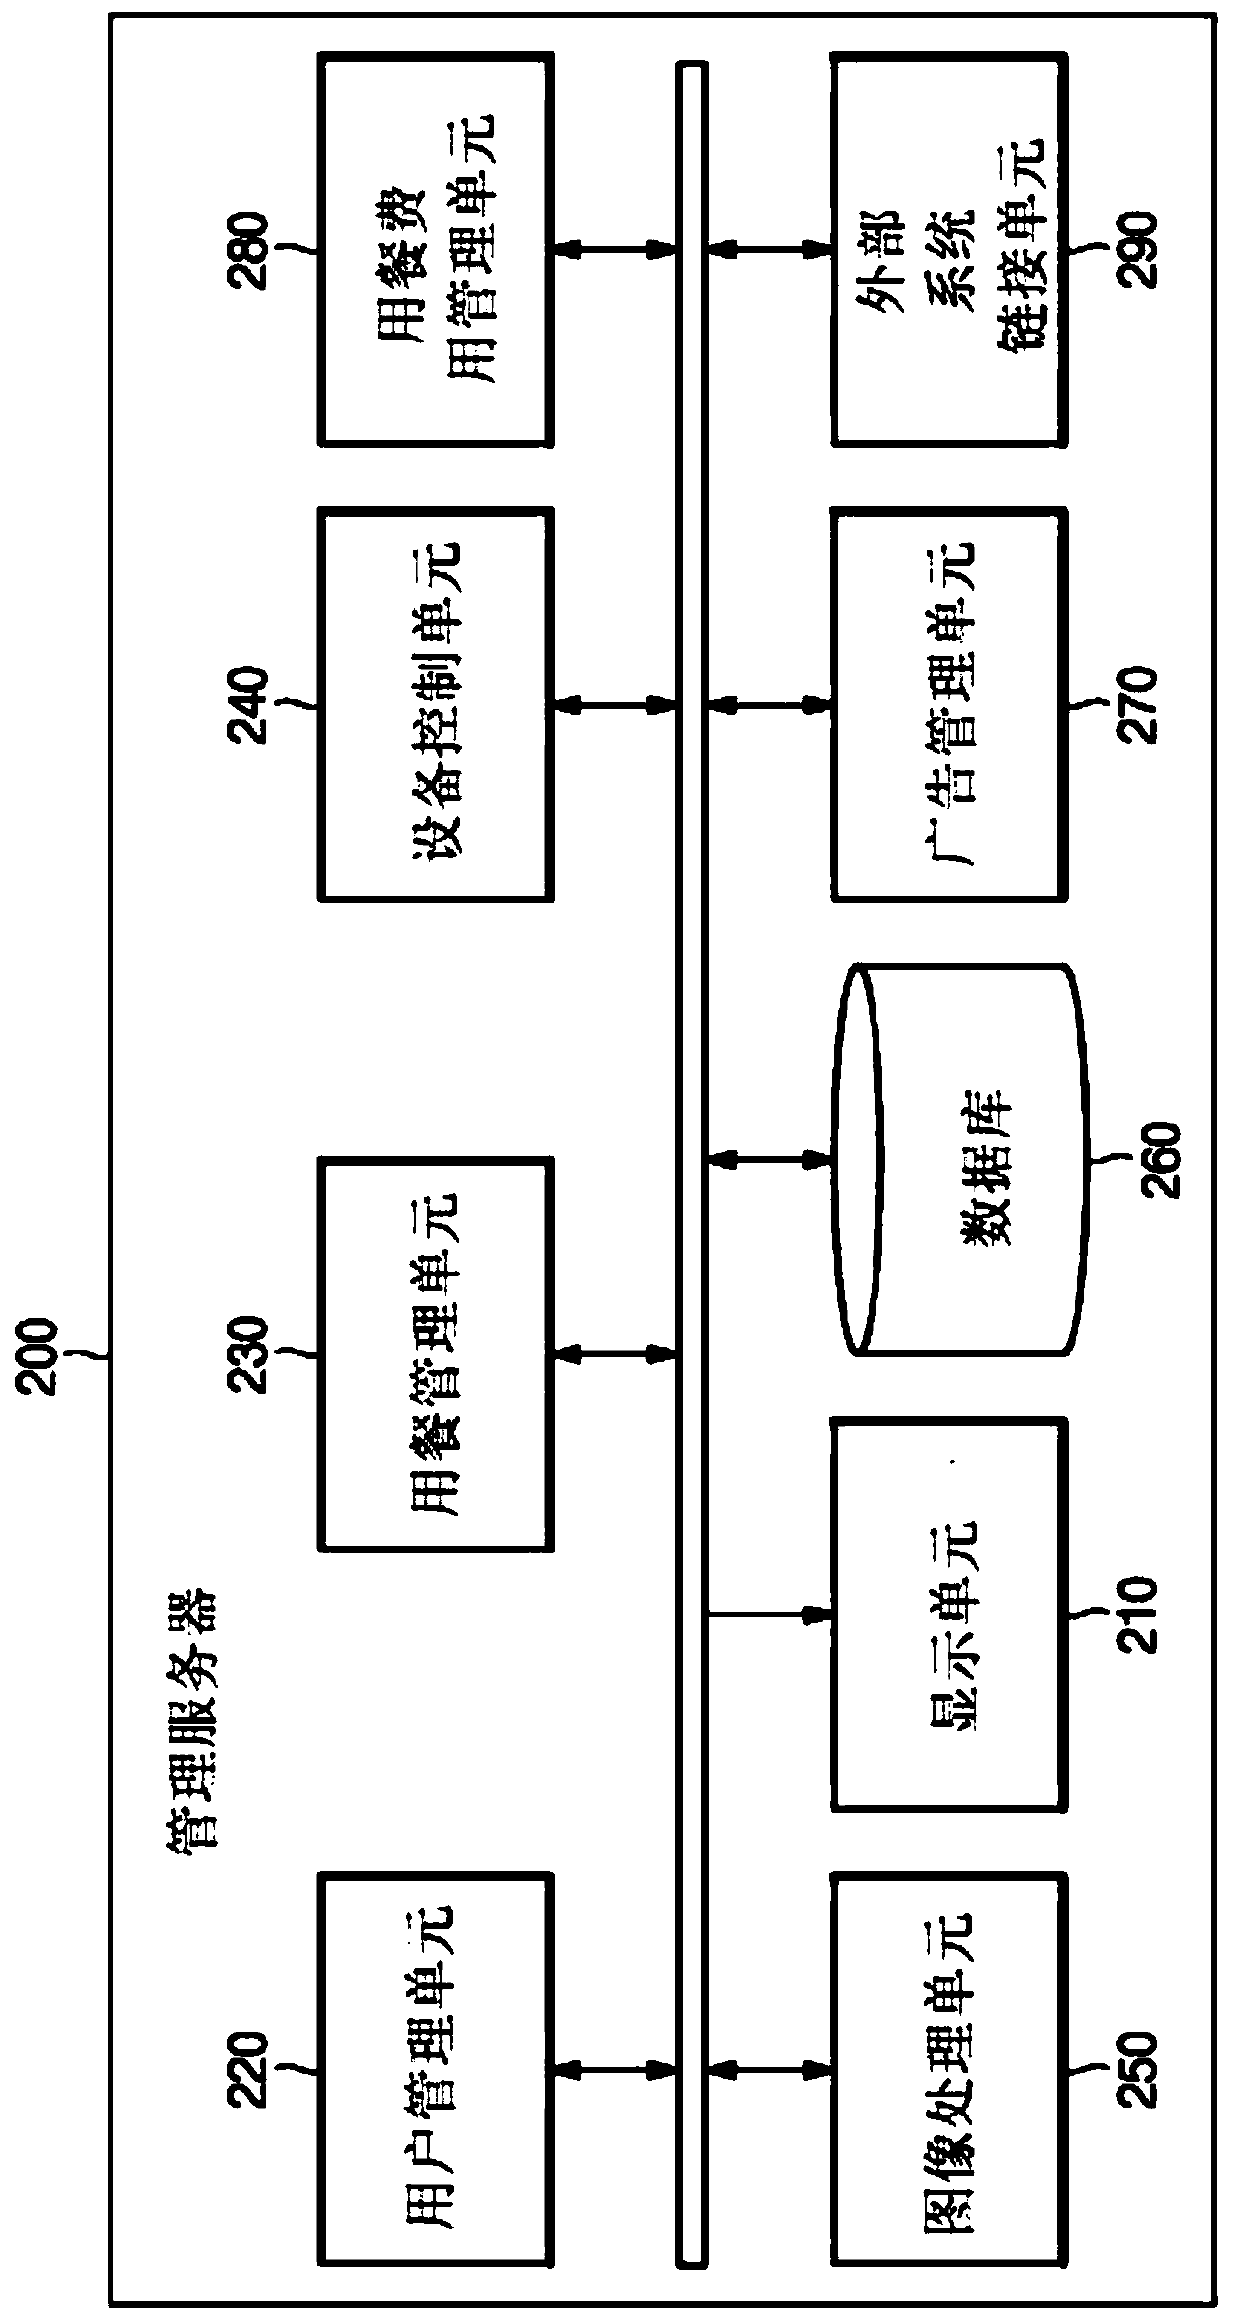 Meal service management system and operating method therefor